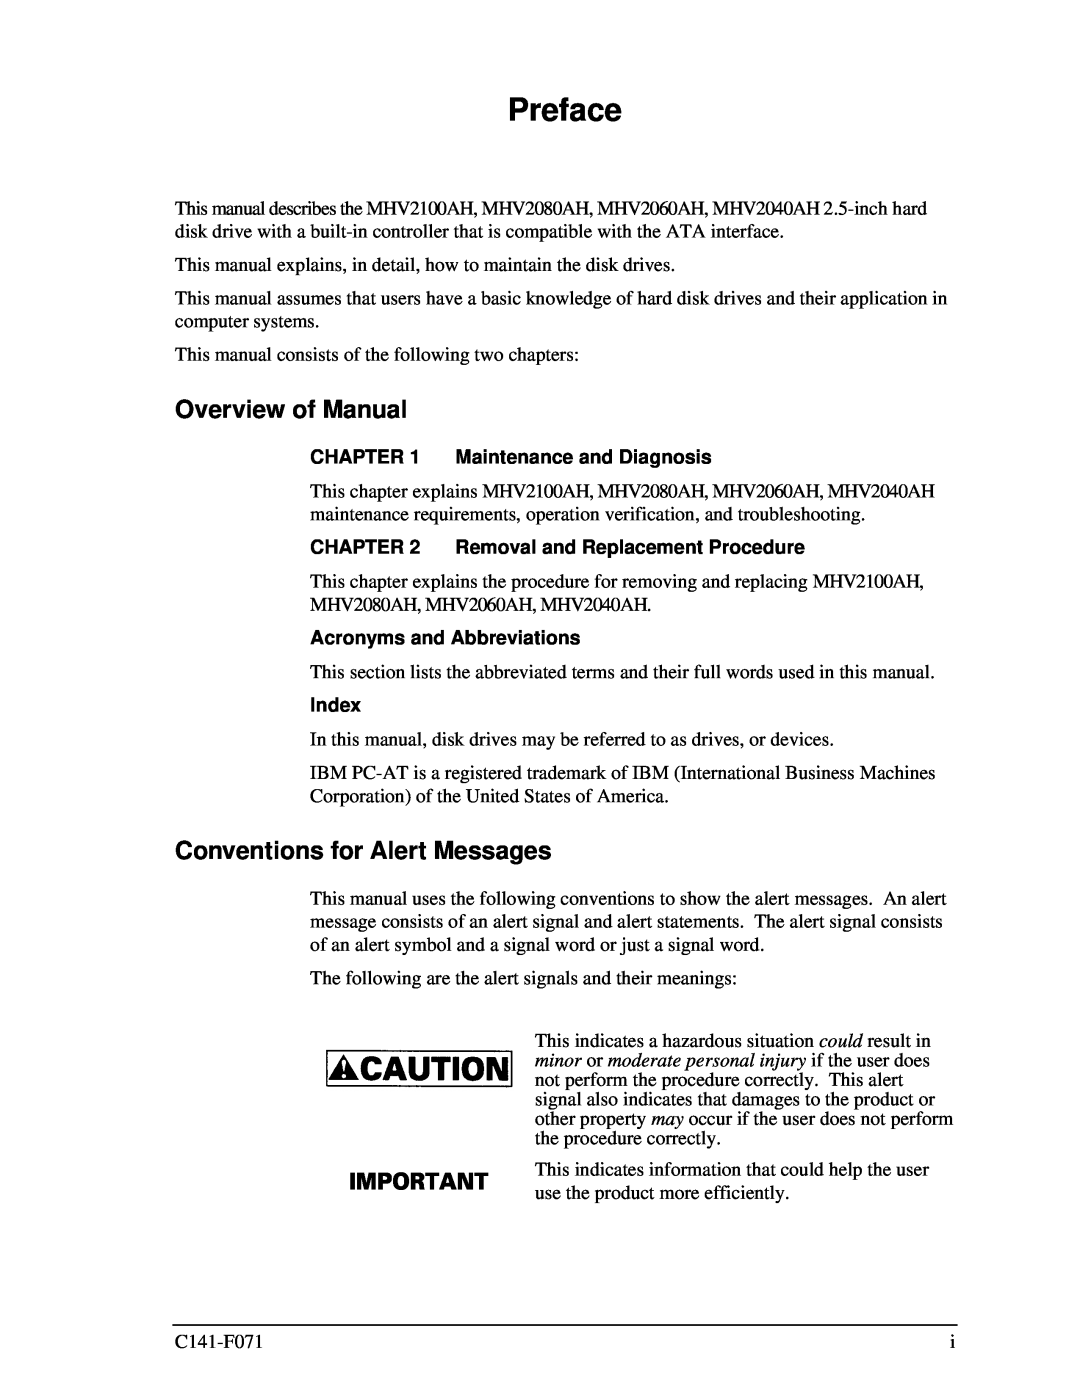 Fujitsu MHV2060AH, MHV2100AH Preface, Overview of Manual, Conventions for Alert Messages, Maintenance and Diagnosis, Index 